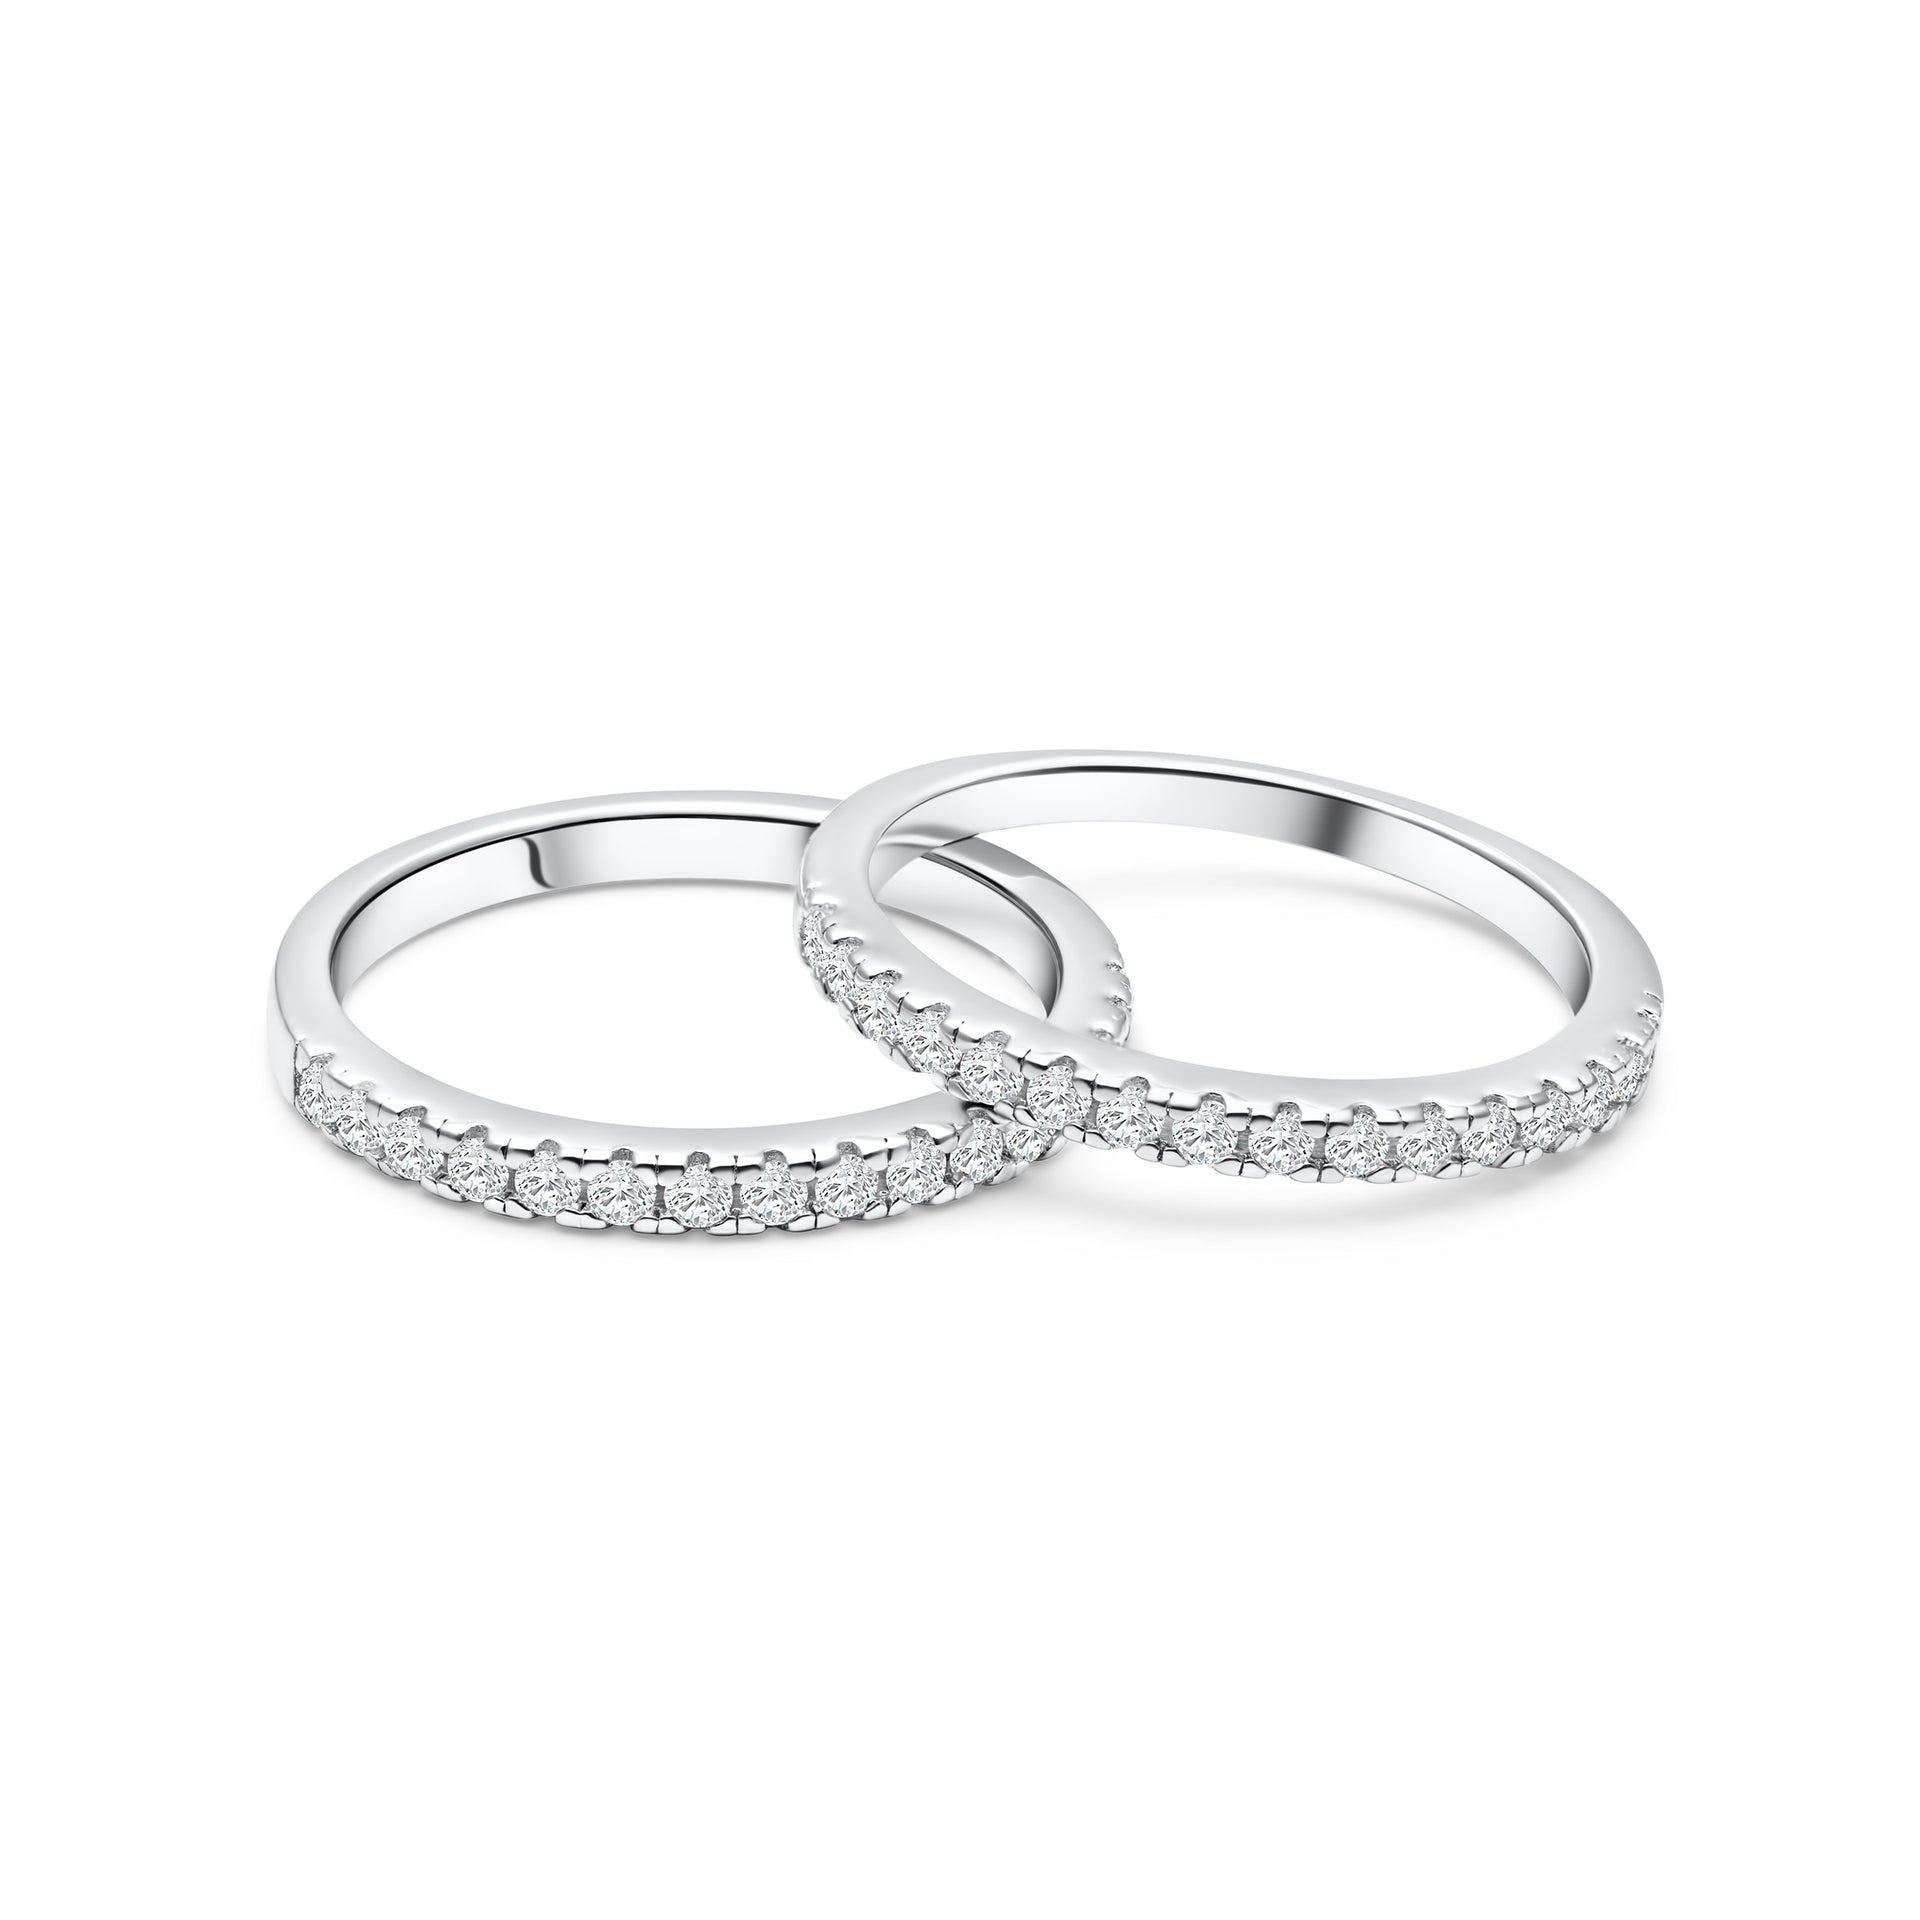 two gorgeous desire engagement rings shown in a duo stack